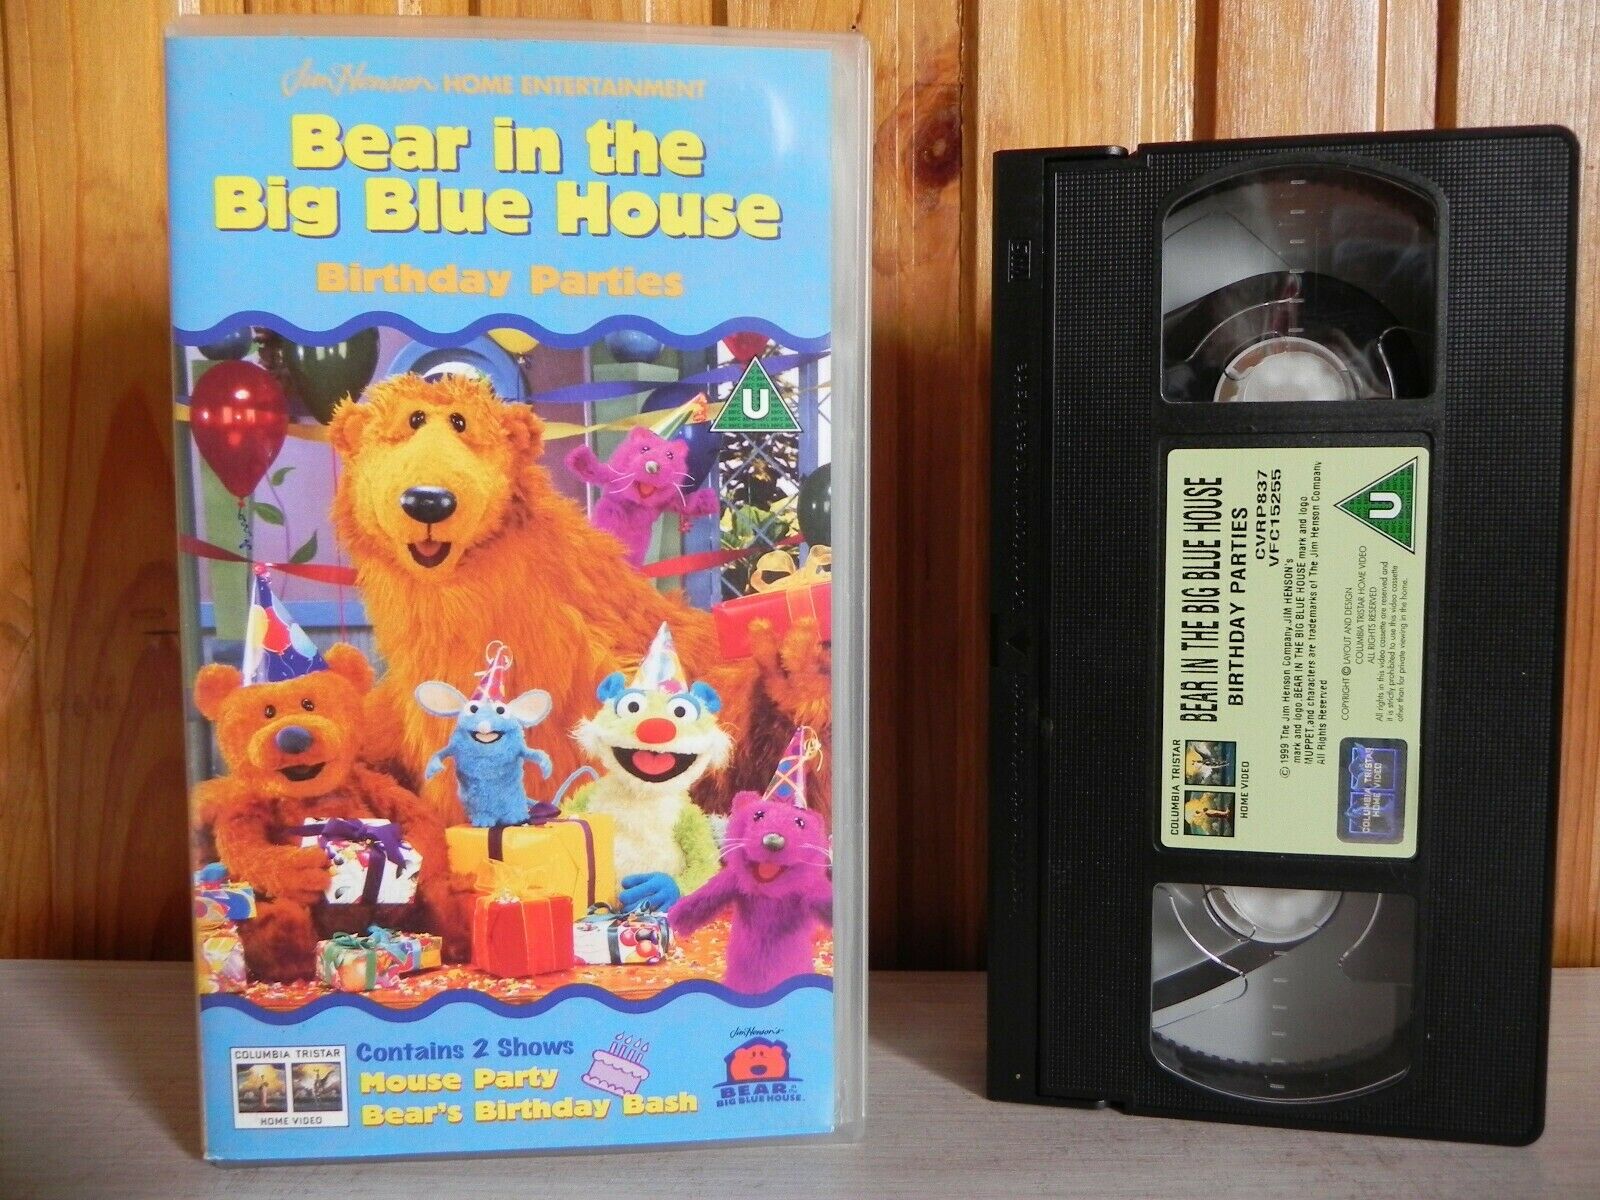 Bear In The Big Blue House - Birthday Parties - Kid's Education Games - Pal VHS-